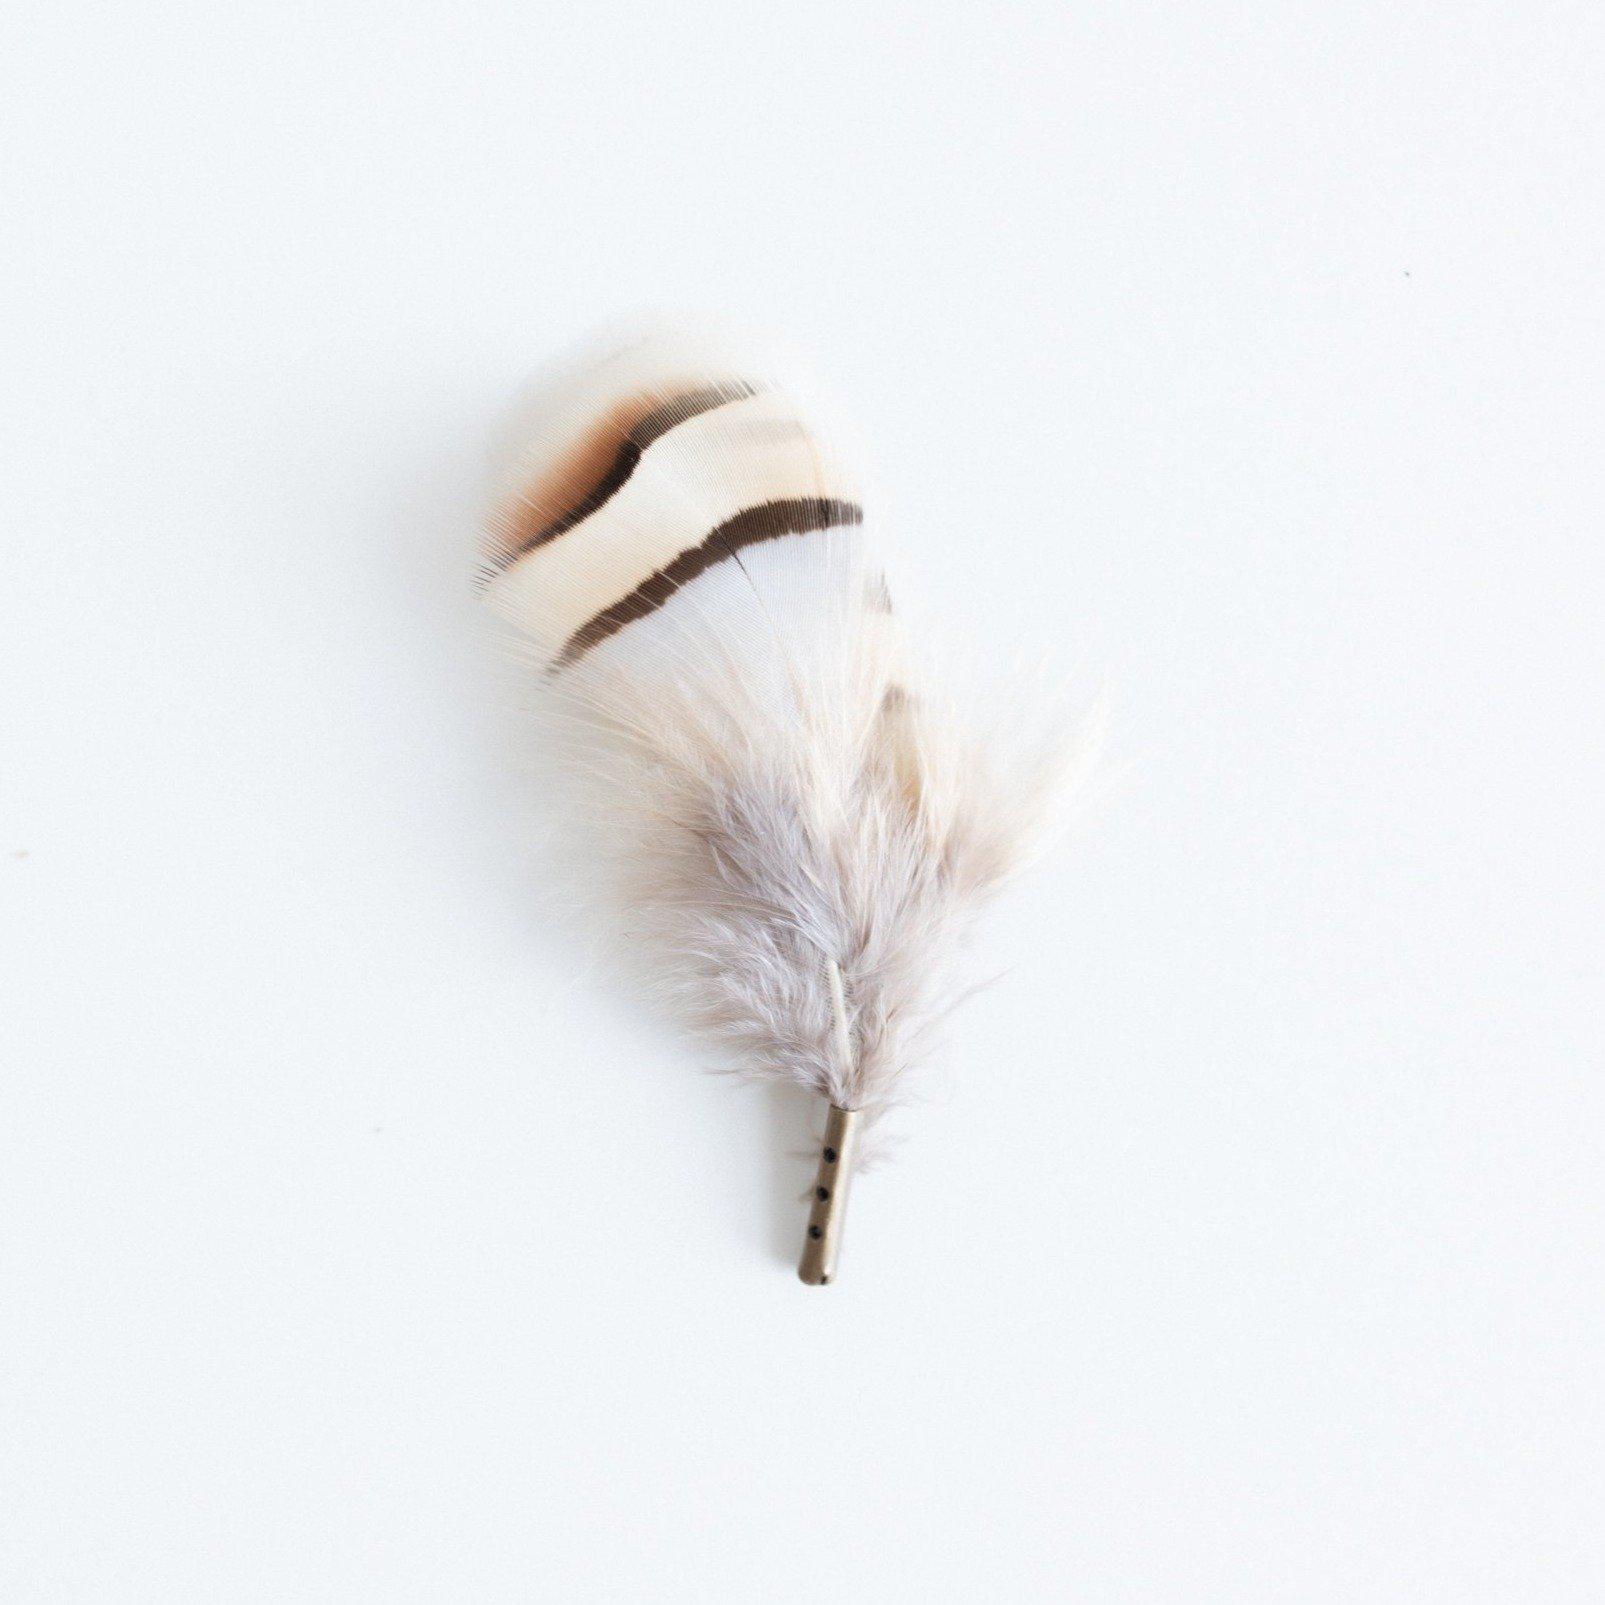 Gigi Pip hat bands + trims for women's hats - Grey + Cream Feather - 8 cm multi-toned feather add-on with grey, taupe, brown + white notes that slides into any hat band and fits snug against your crown for extra personalization [grey + cream]